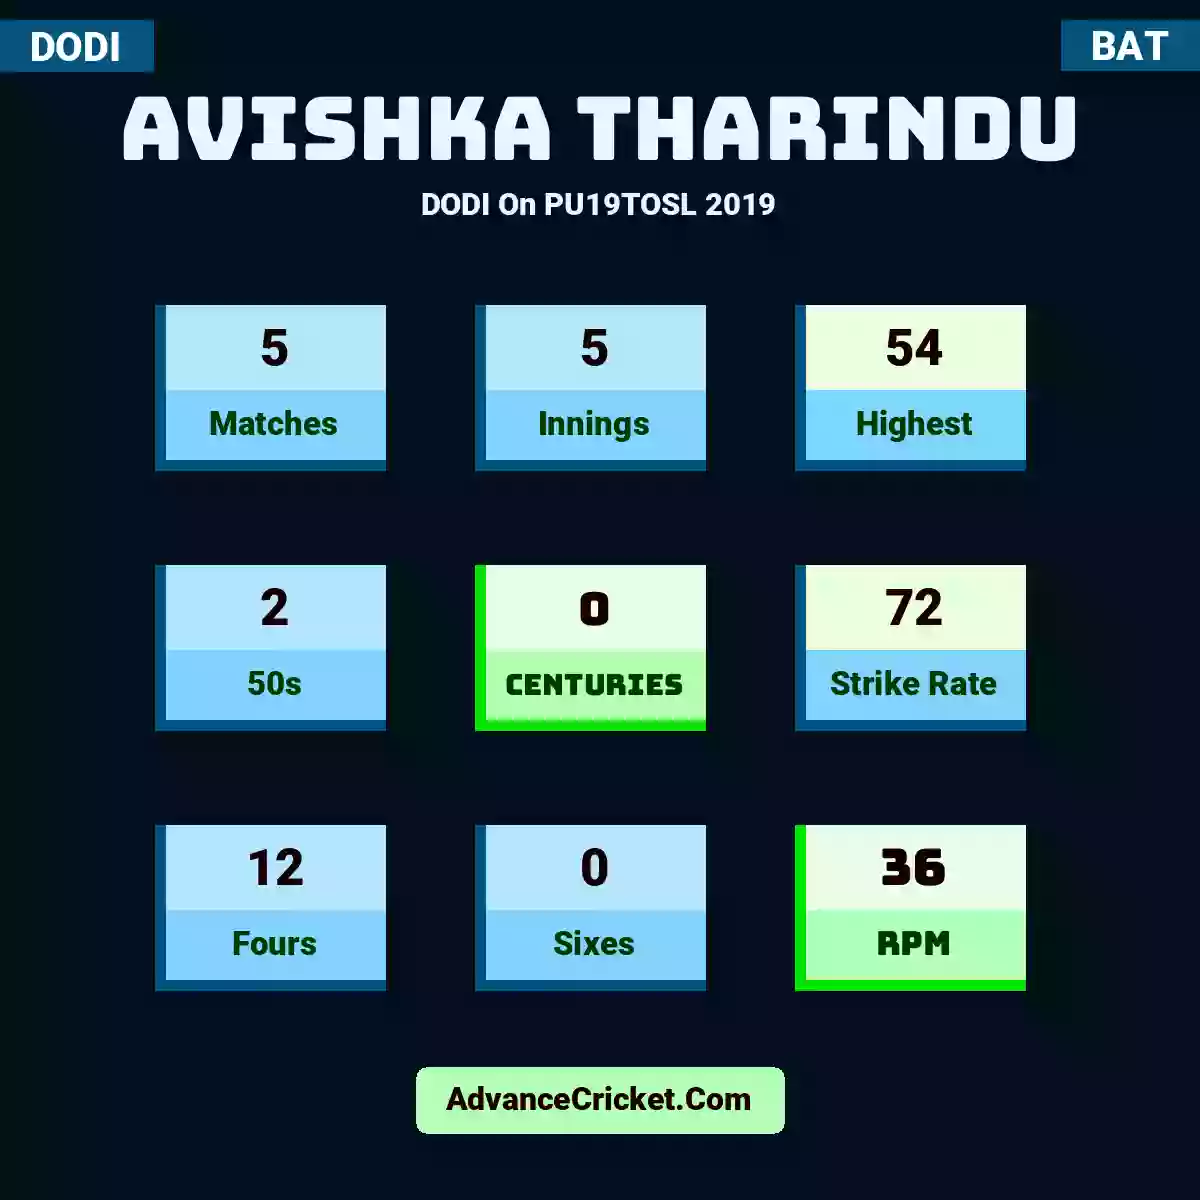 Avishka Tharindu DODI  On PU19TOSL 2019, Avishka Tharindu played 5 matches, scored 54 runs as highest, 2 half-centuries, and 0 centuries, with a strike rate of 72. A.Tharindu hit 12 fours and 0 sixes, with an RPM of 36.